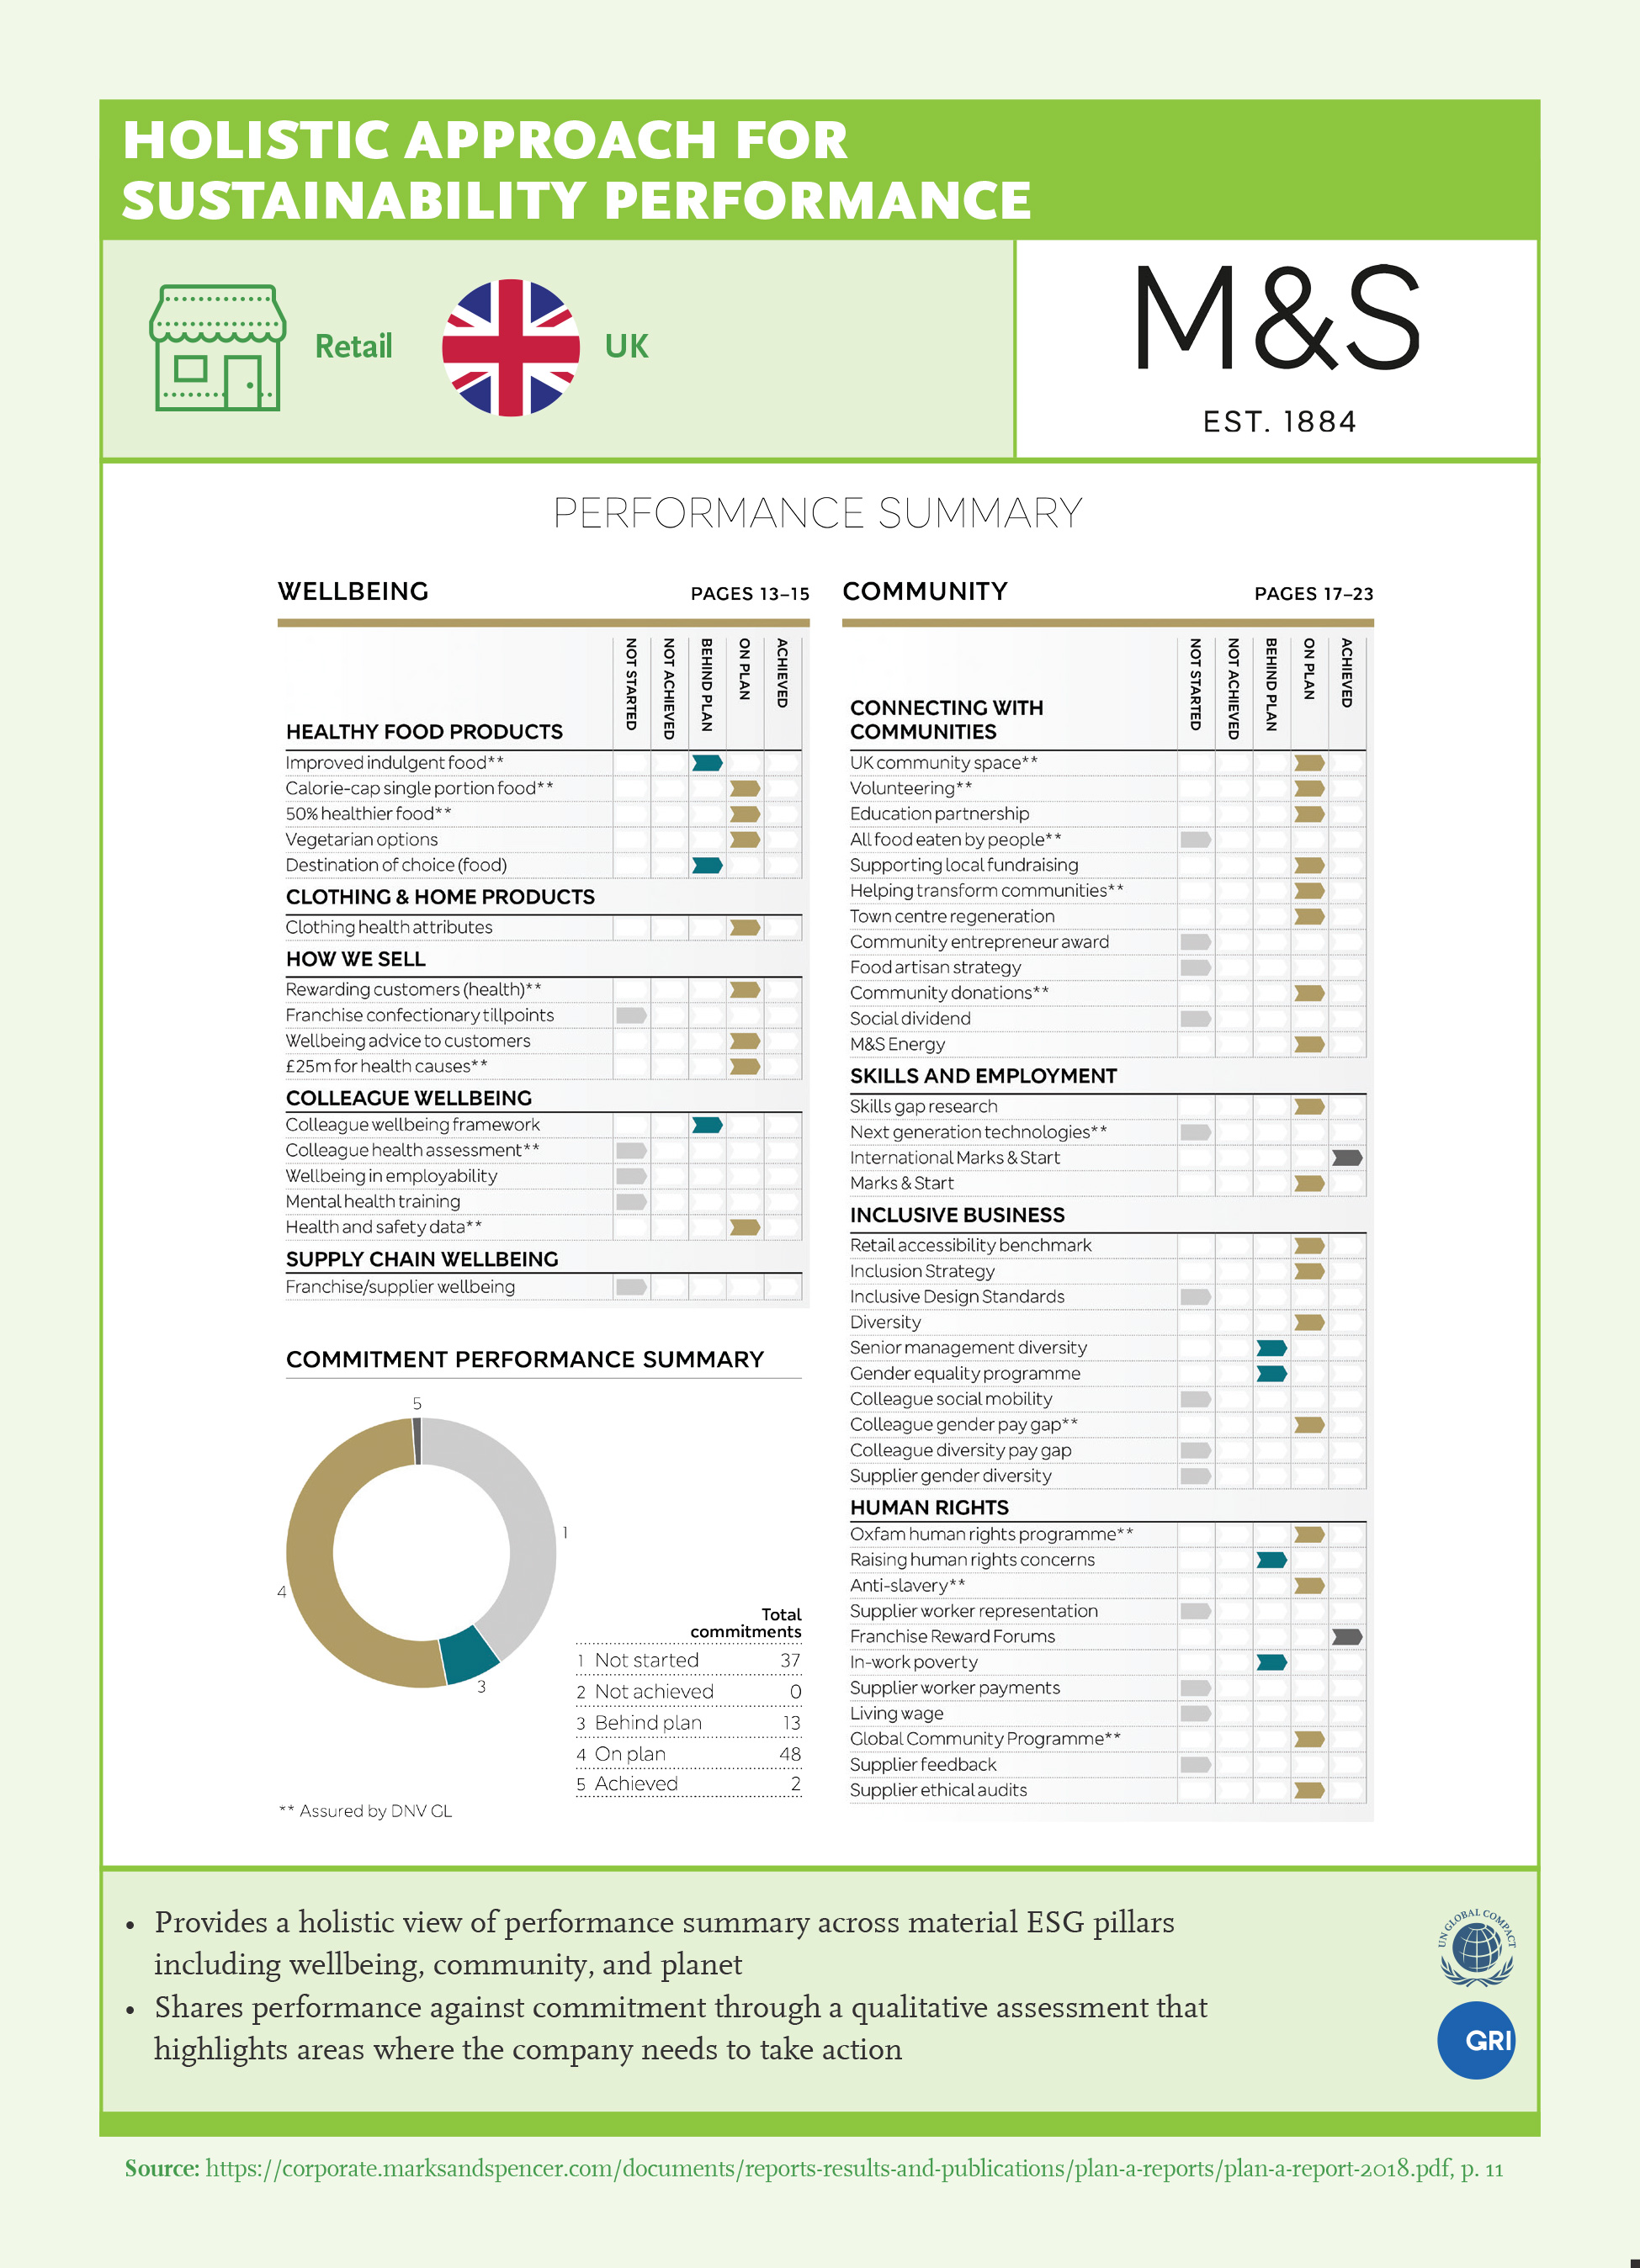 Holistic Approach for Sustainability Performance: Marks and Spencer